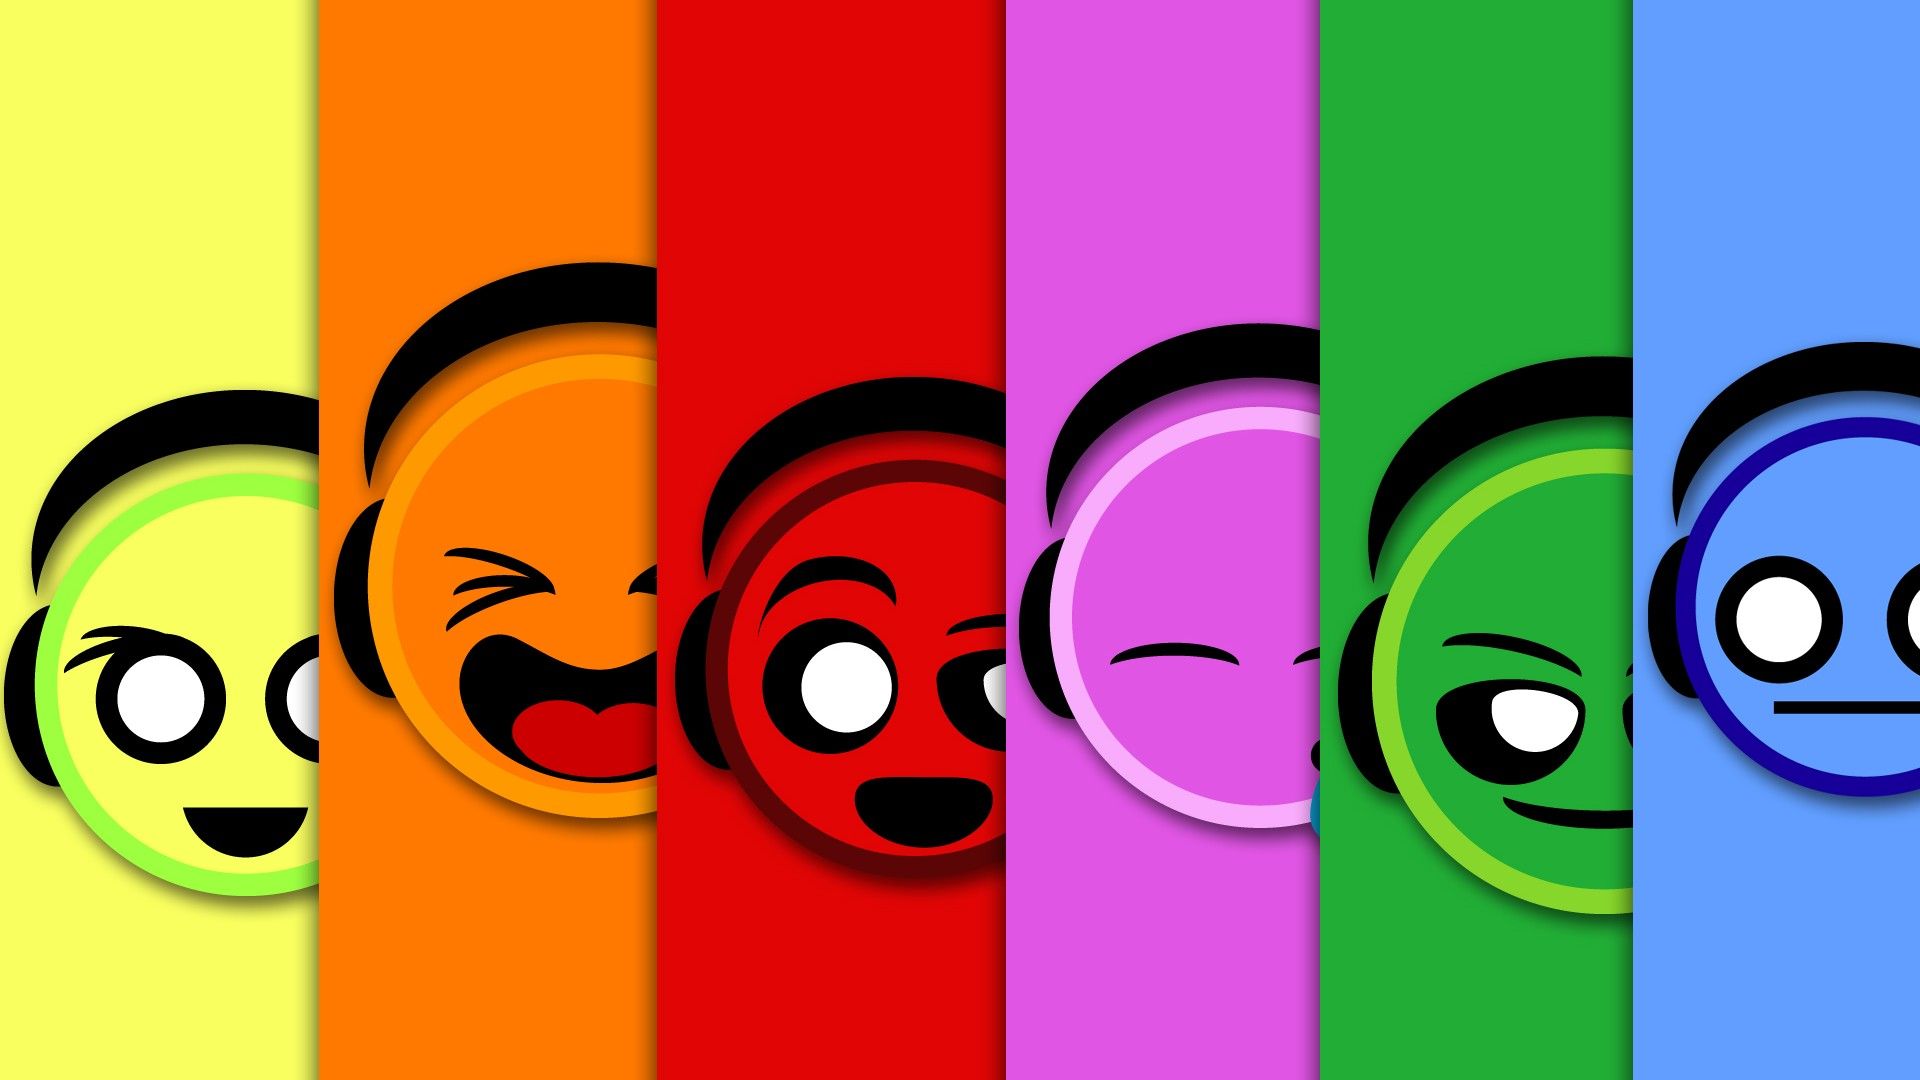 HD wallpaper, Faces, Smiley, 25433, Colorful